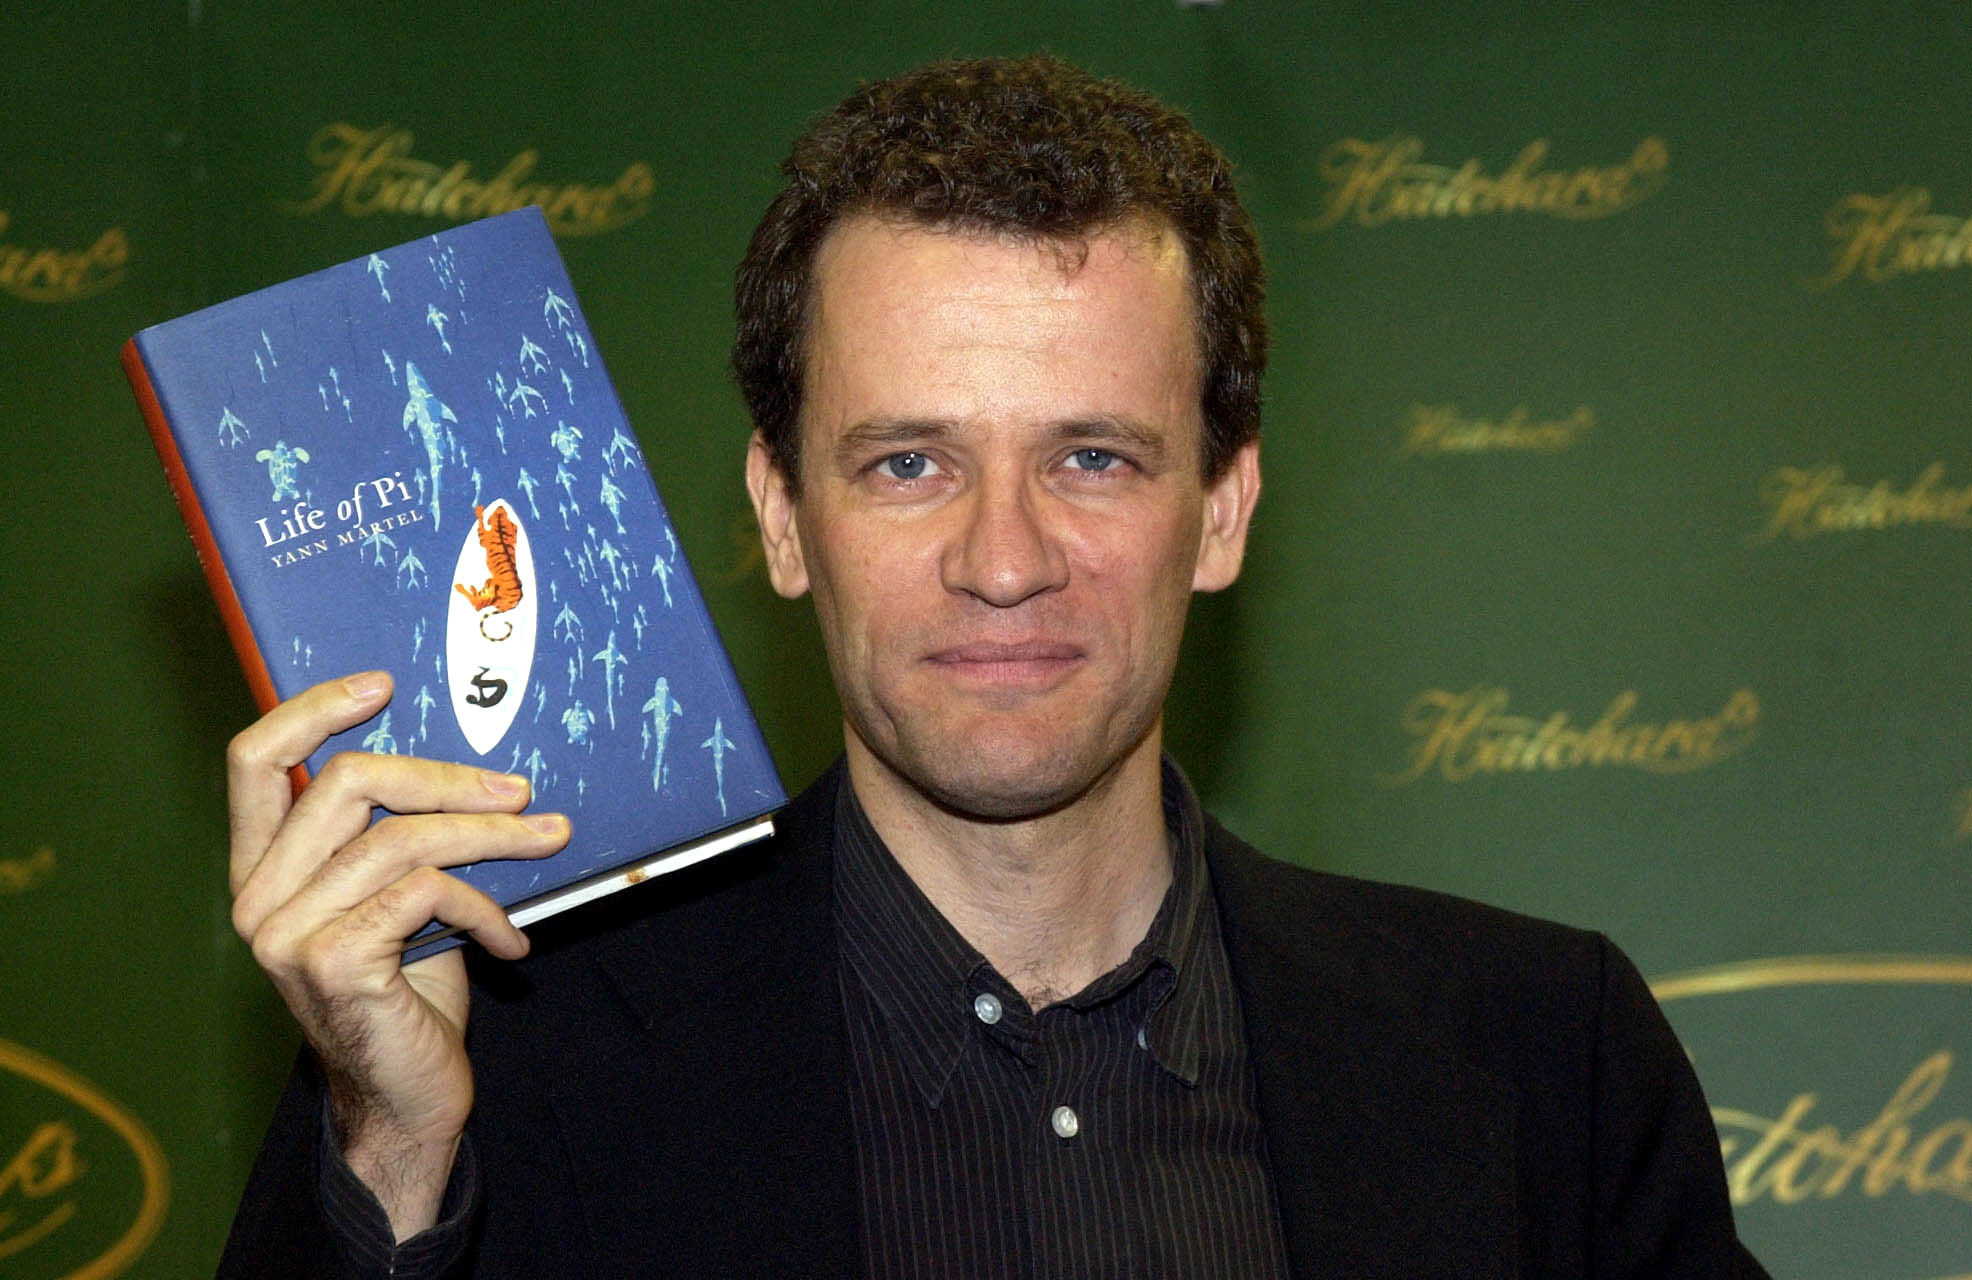 Yann Martel holding up a copy of his novel Life of Pi